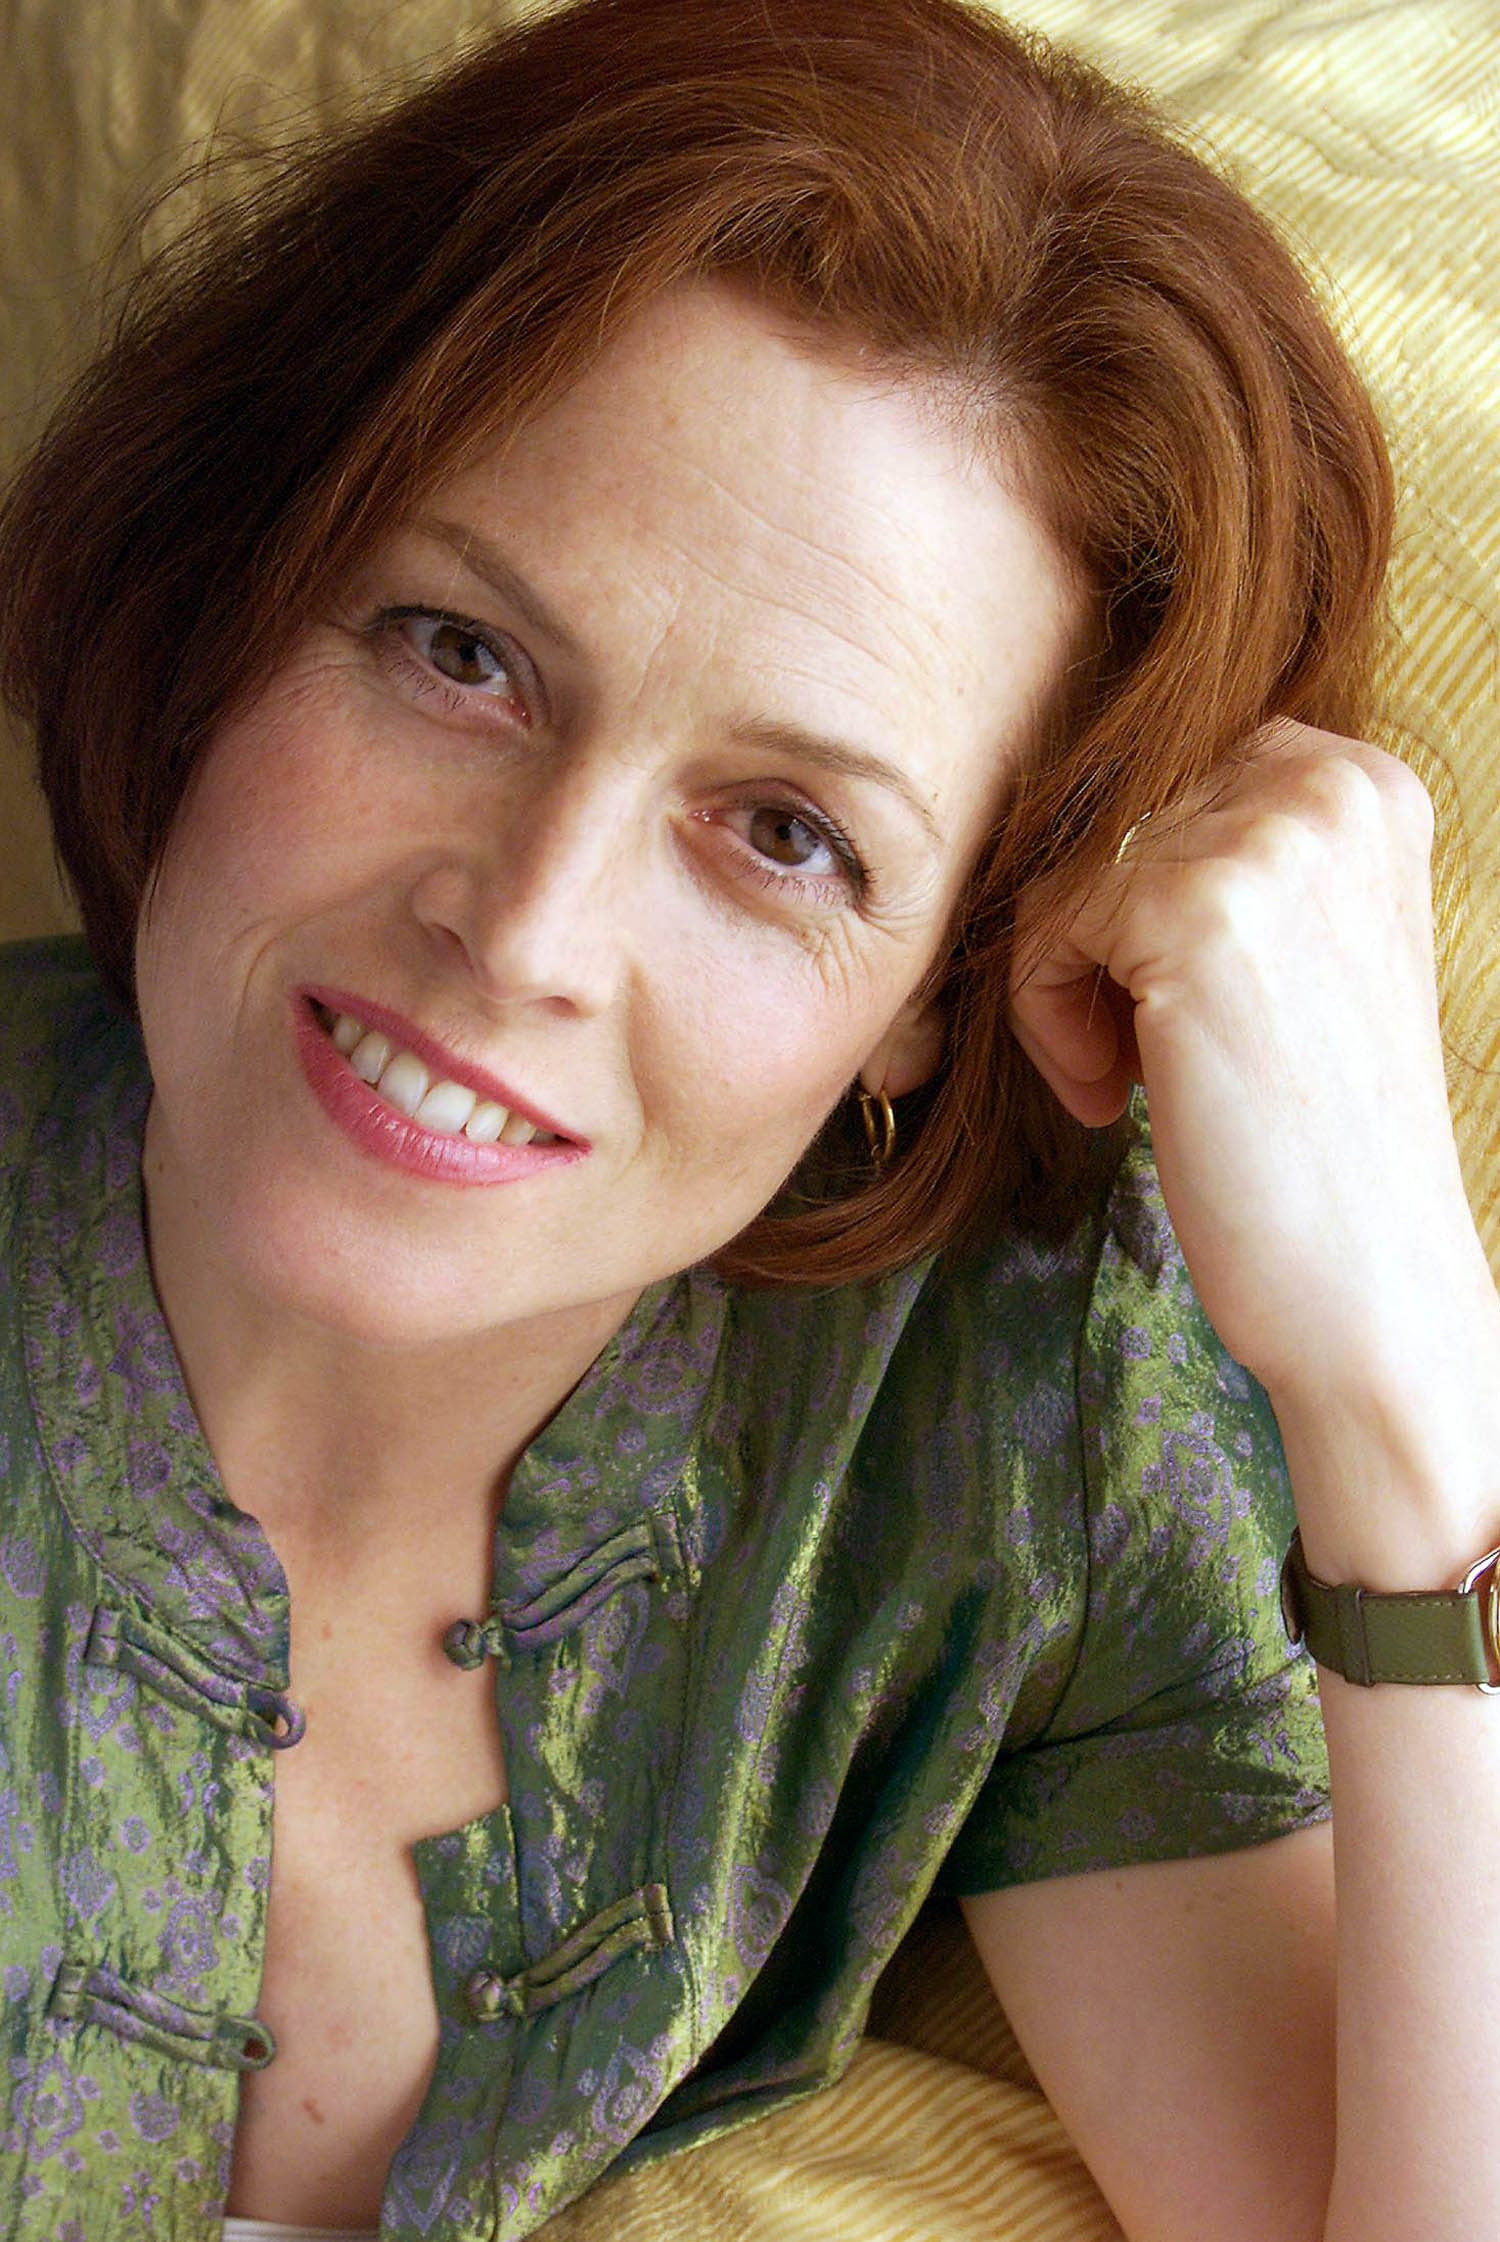 Sigourney Weaver: Known for portraying Dr. Grace Augustine in Avatar, the highest-grossing film of all time. 1500x2250 HD Wallpaper.